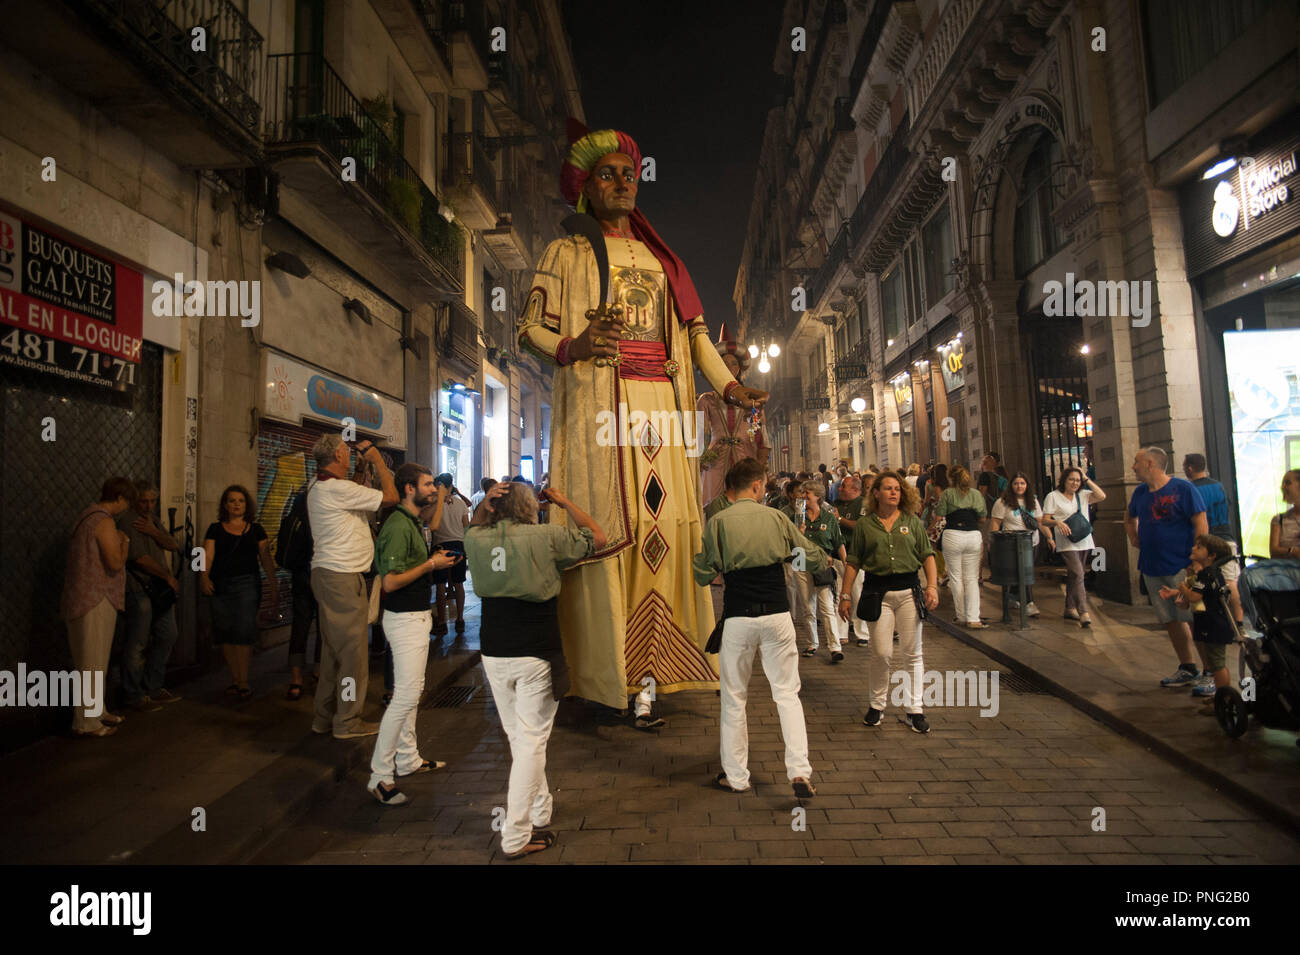 Barcelona, Spain. 21st September 2018. Thousands of people take to the streets to enjoy the MercÃ¨ festivities in Barcelona. The major party of the MercÃ¨ is the biggest festival in Barcelona, Spain, since the year 1902 the town hall of the city made for the first time a program of extraordinary events to celebrate the feast of the 'Virgen de la Merced', which takes place on 24 September.Â© Charlie Perez/Alamy Live News Stock Photo